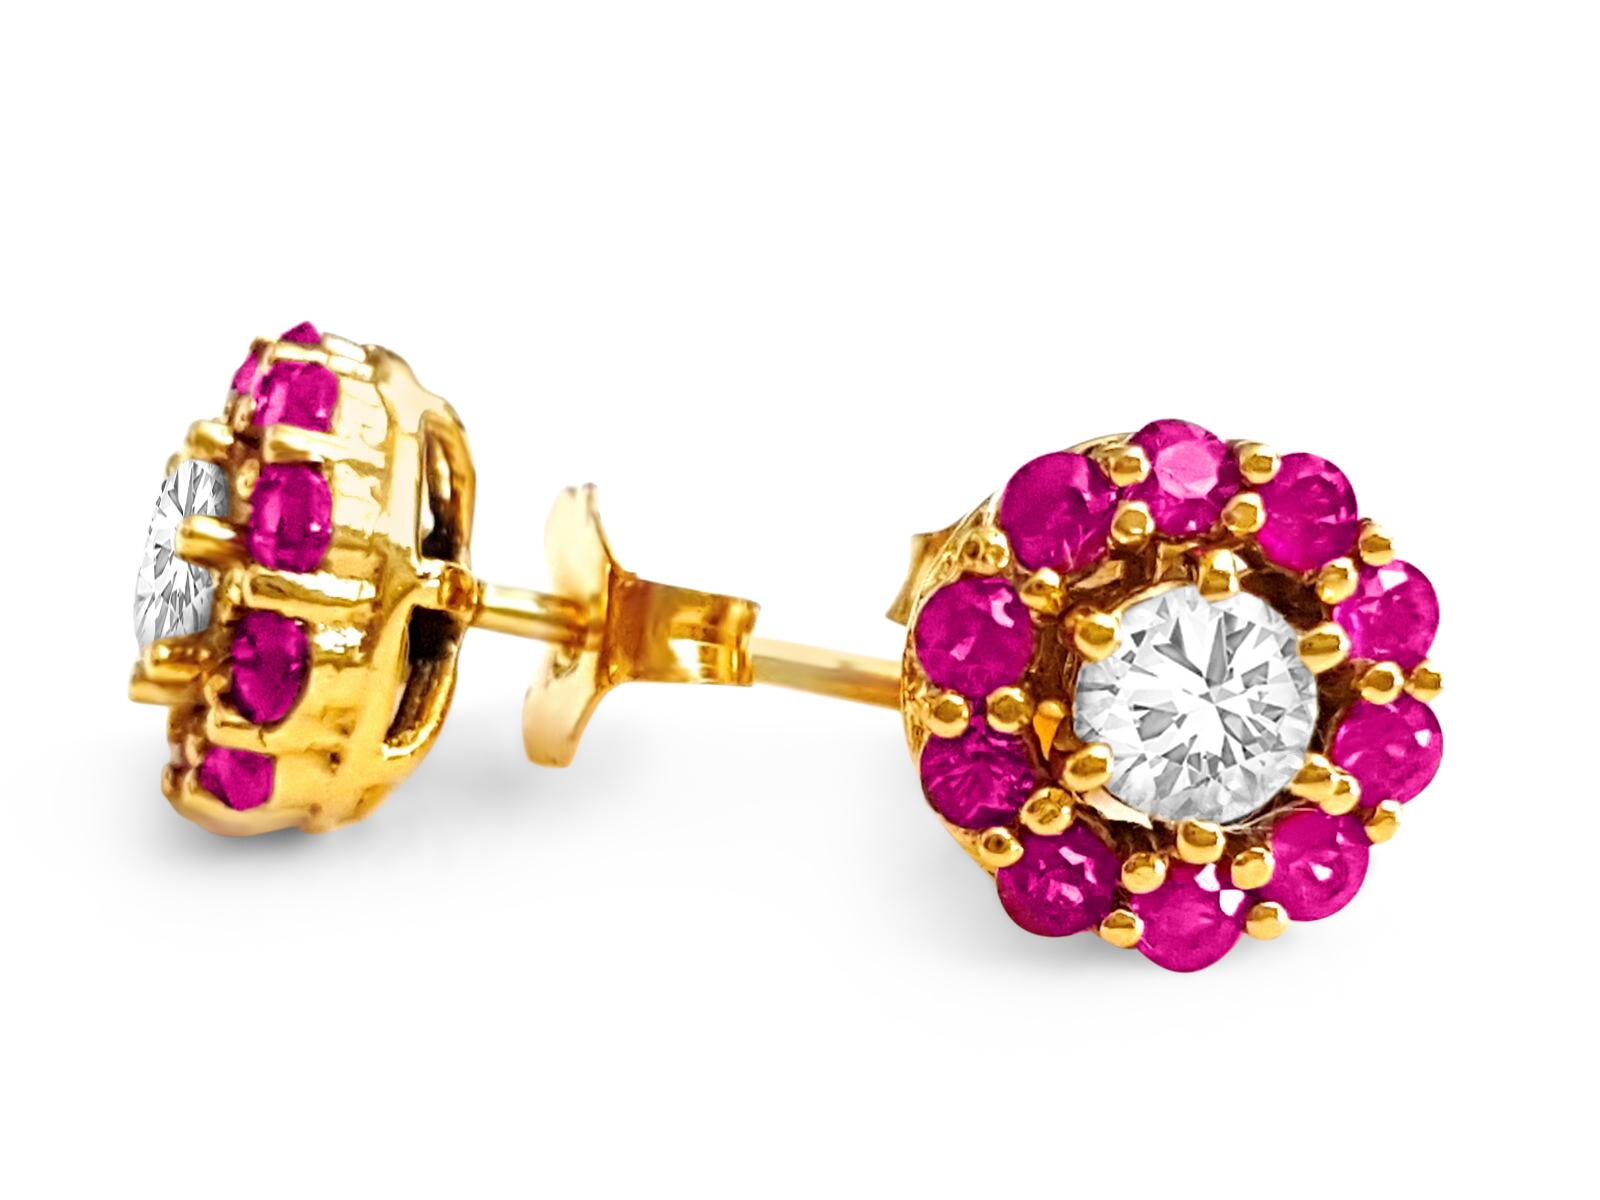 Metal: 14k Yellow Gold. 
Diamonds: 0.50 carats total. VS clarity & F color. 
Ruby: 0.85ct, diamond cut ruby. All precious stones are 100% natural earth mined. TCW of all precious stones: 1.35cts. Womens diamond and ruby studs. Deep crimson ruby.